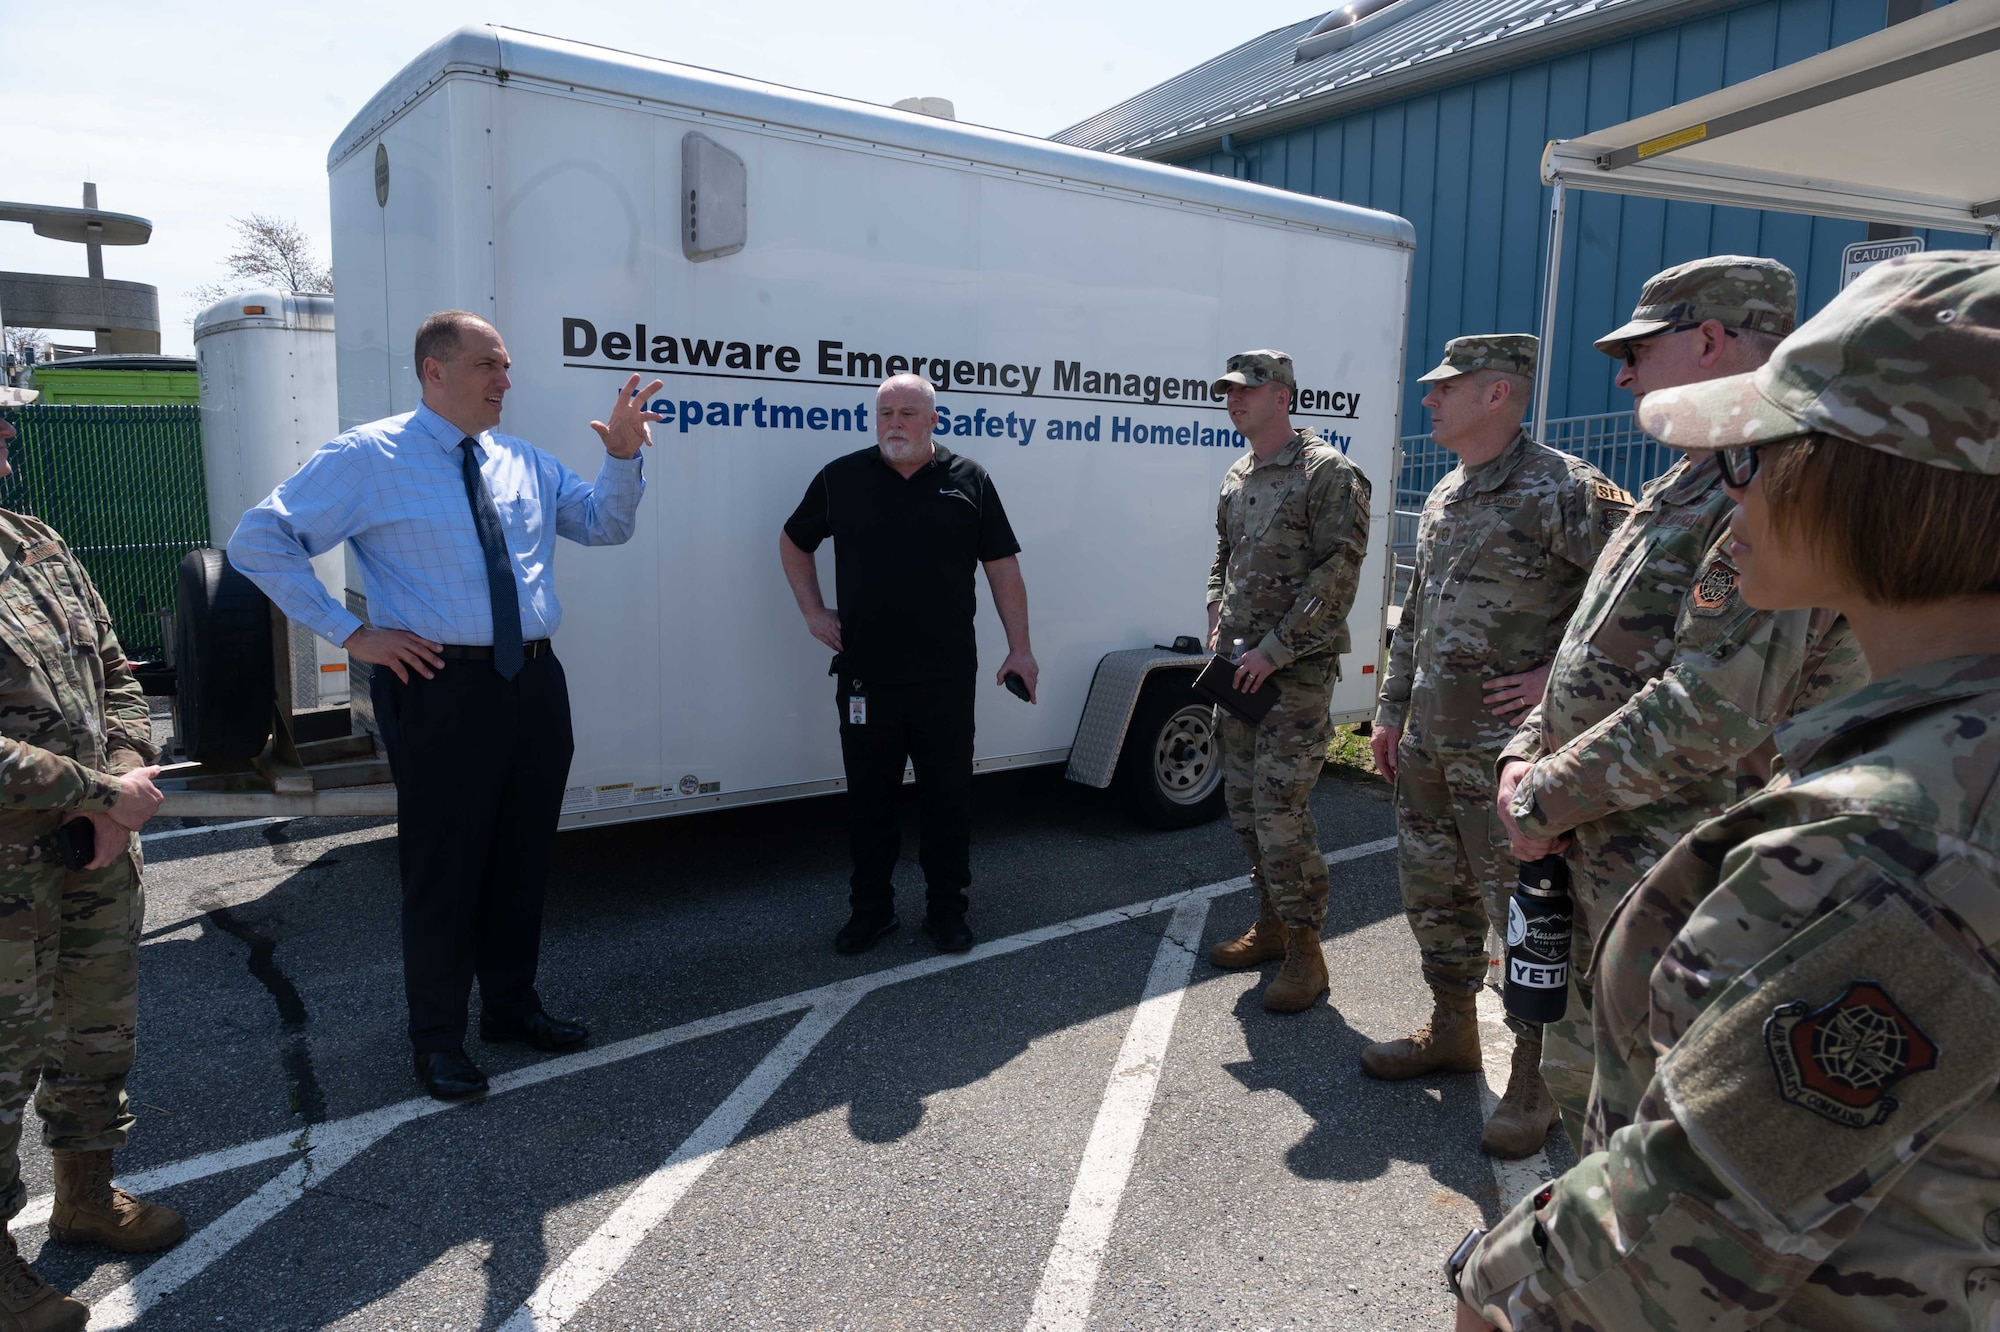 Representatives from the 436th Mission Support Group and the 512th MSG pose for a photo in front of the Delaware Emergency Management Agency Emergency Operations Center in Smyrna, Delaware, April 6, 2023. During the immersion event, DEMA was able to share best practices with Team Dover Airmen regarding preparedness for natural disasters, terrorism response, emergency operations center training, behavior threat analysis for school safety and community engagement. (U.S. Air Force photo by Senior Airman Faith Barron)